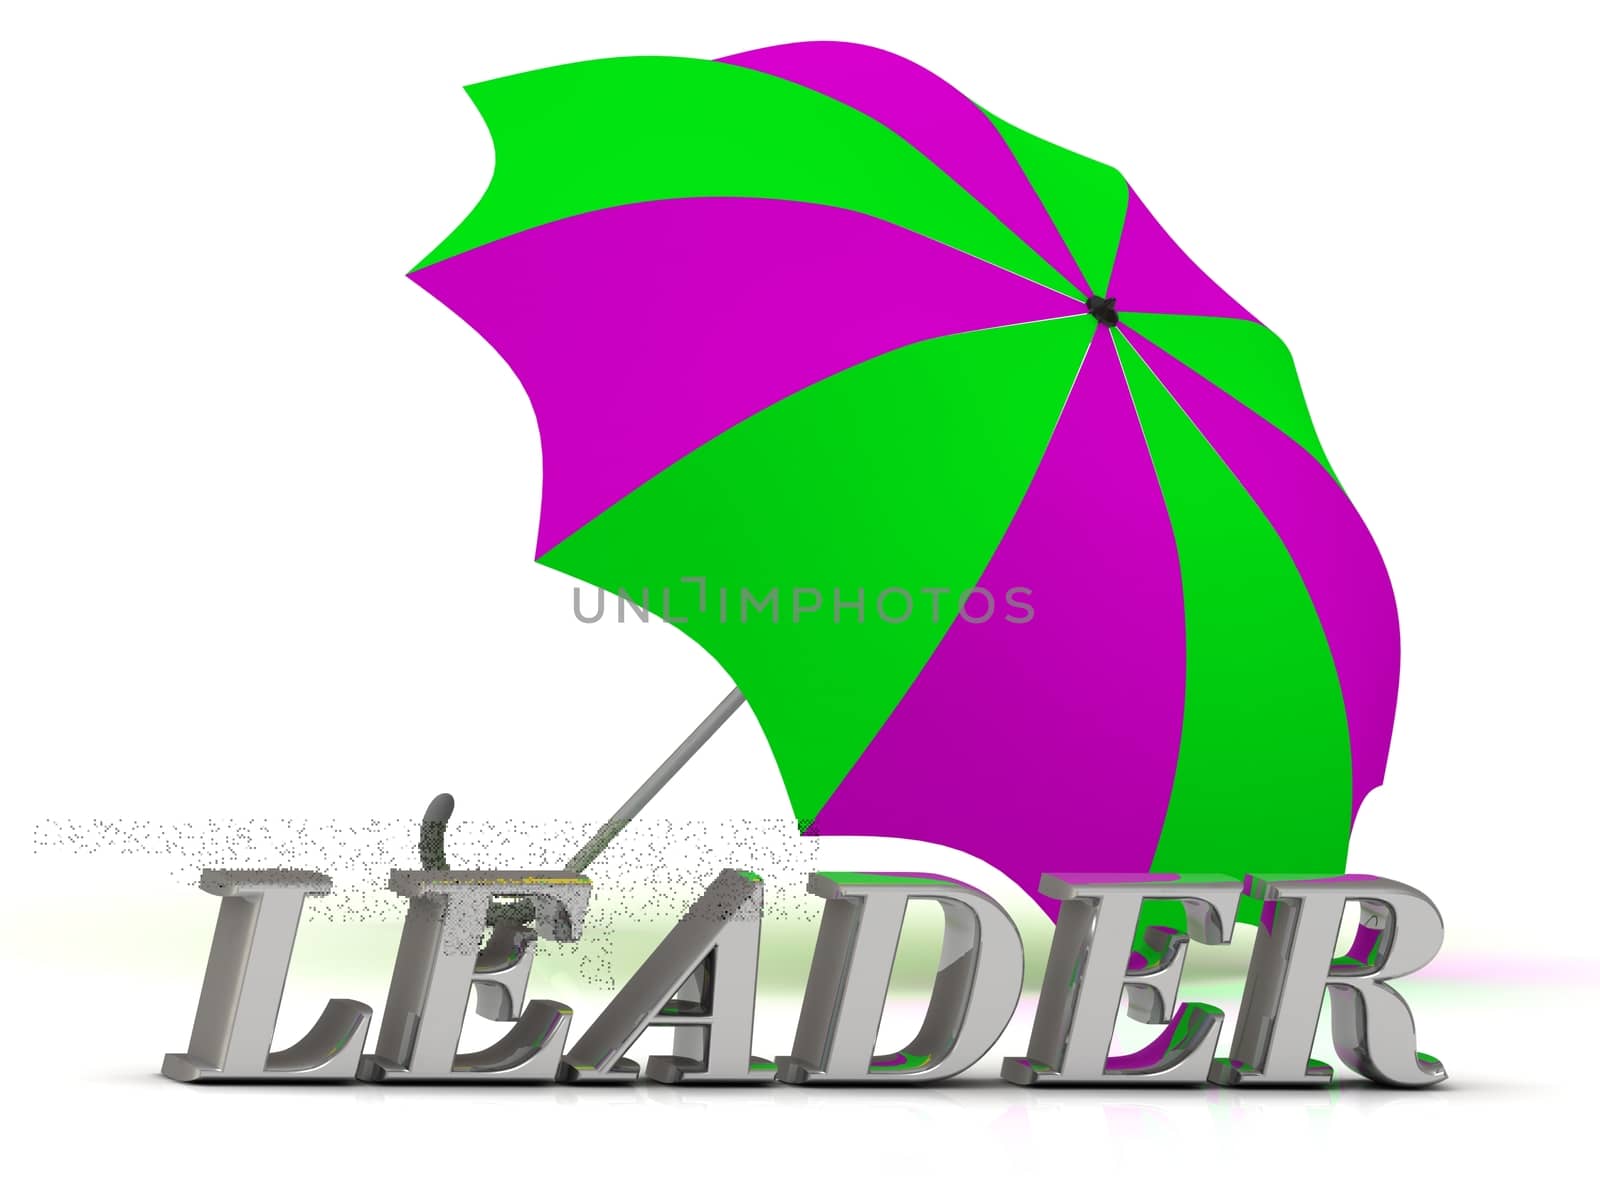 LEADER- inscription of silver letters and umbrella on white background